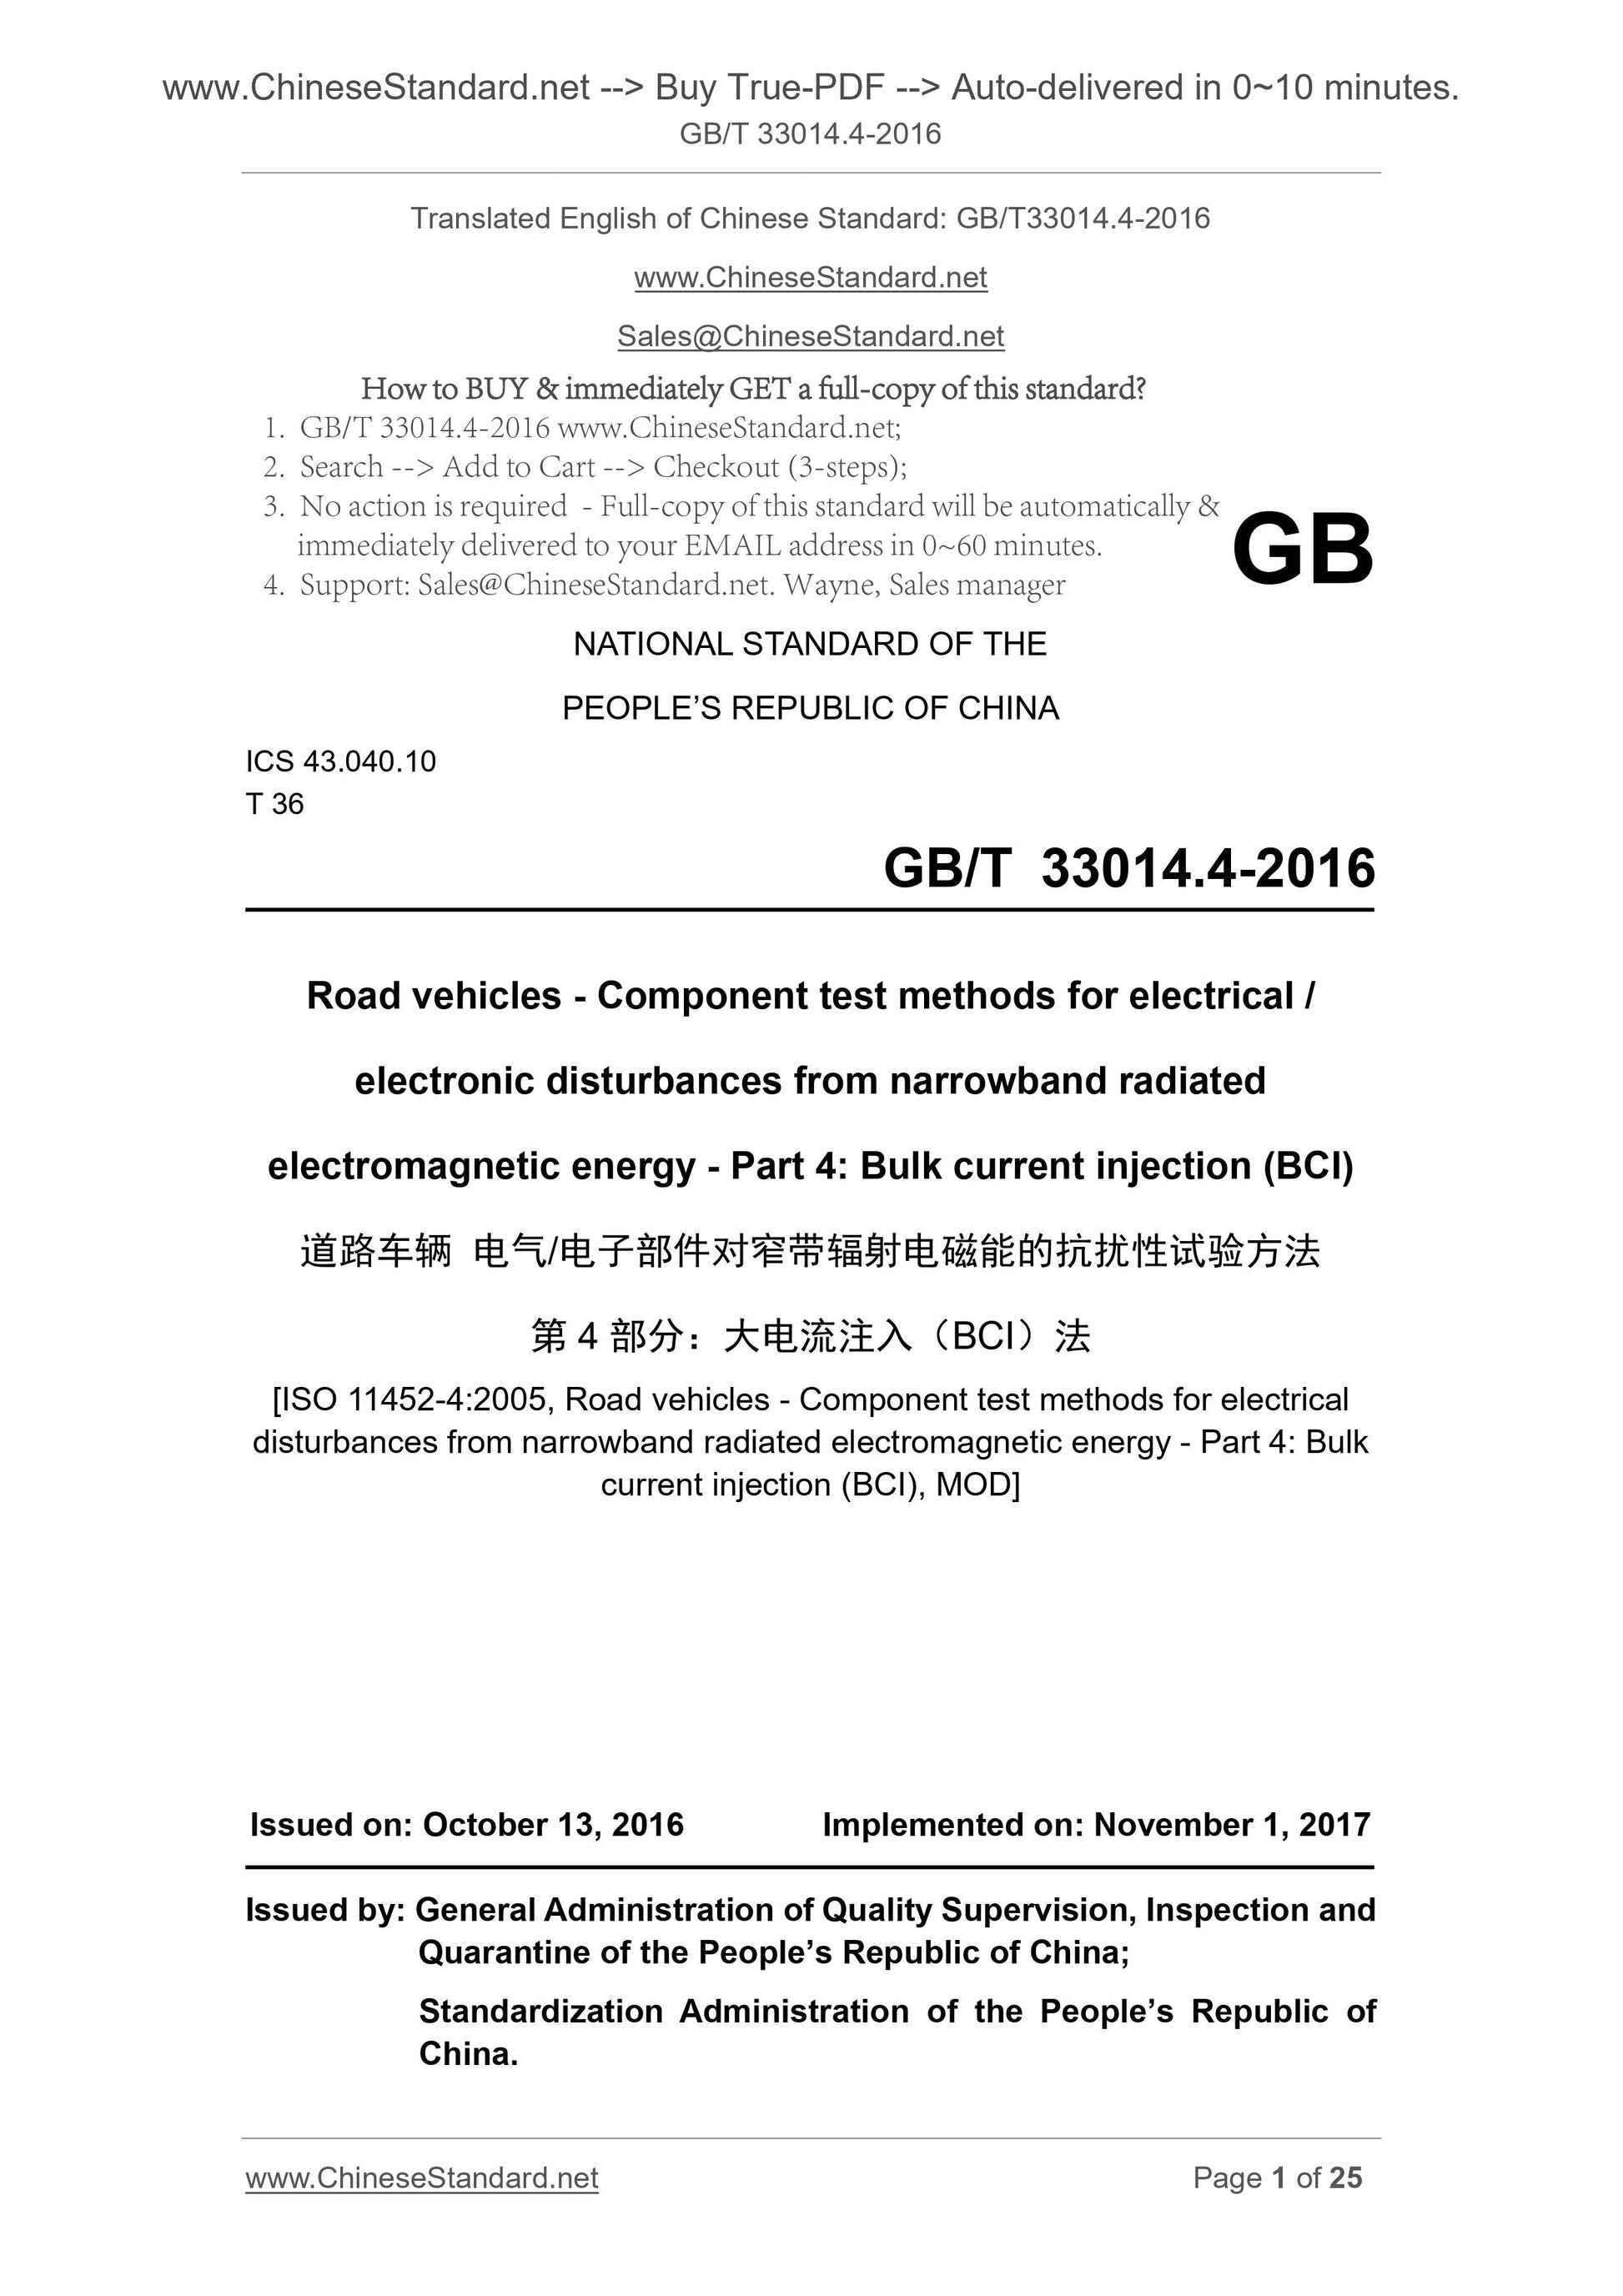 GB/T 33014.4-2016 Page 1